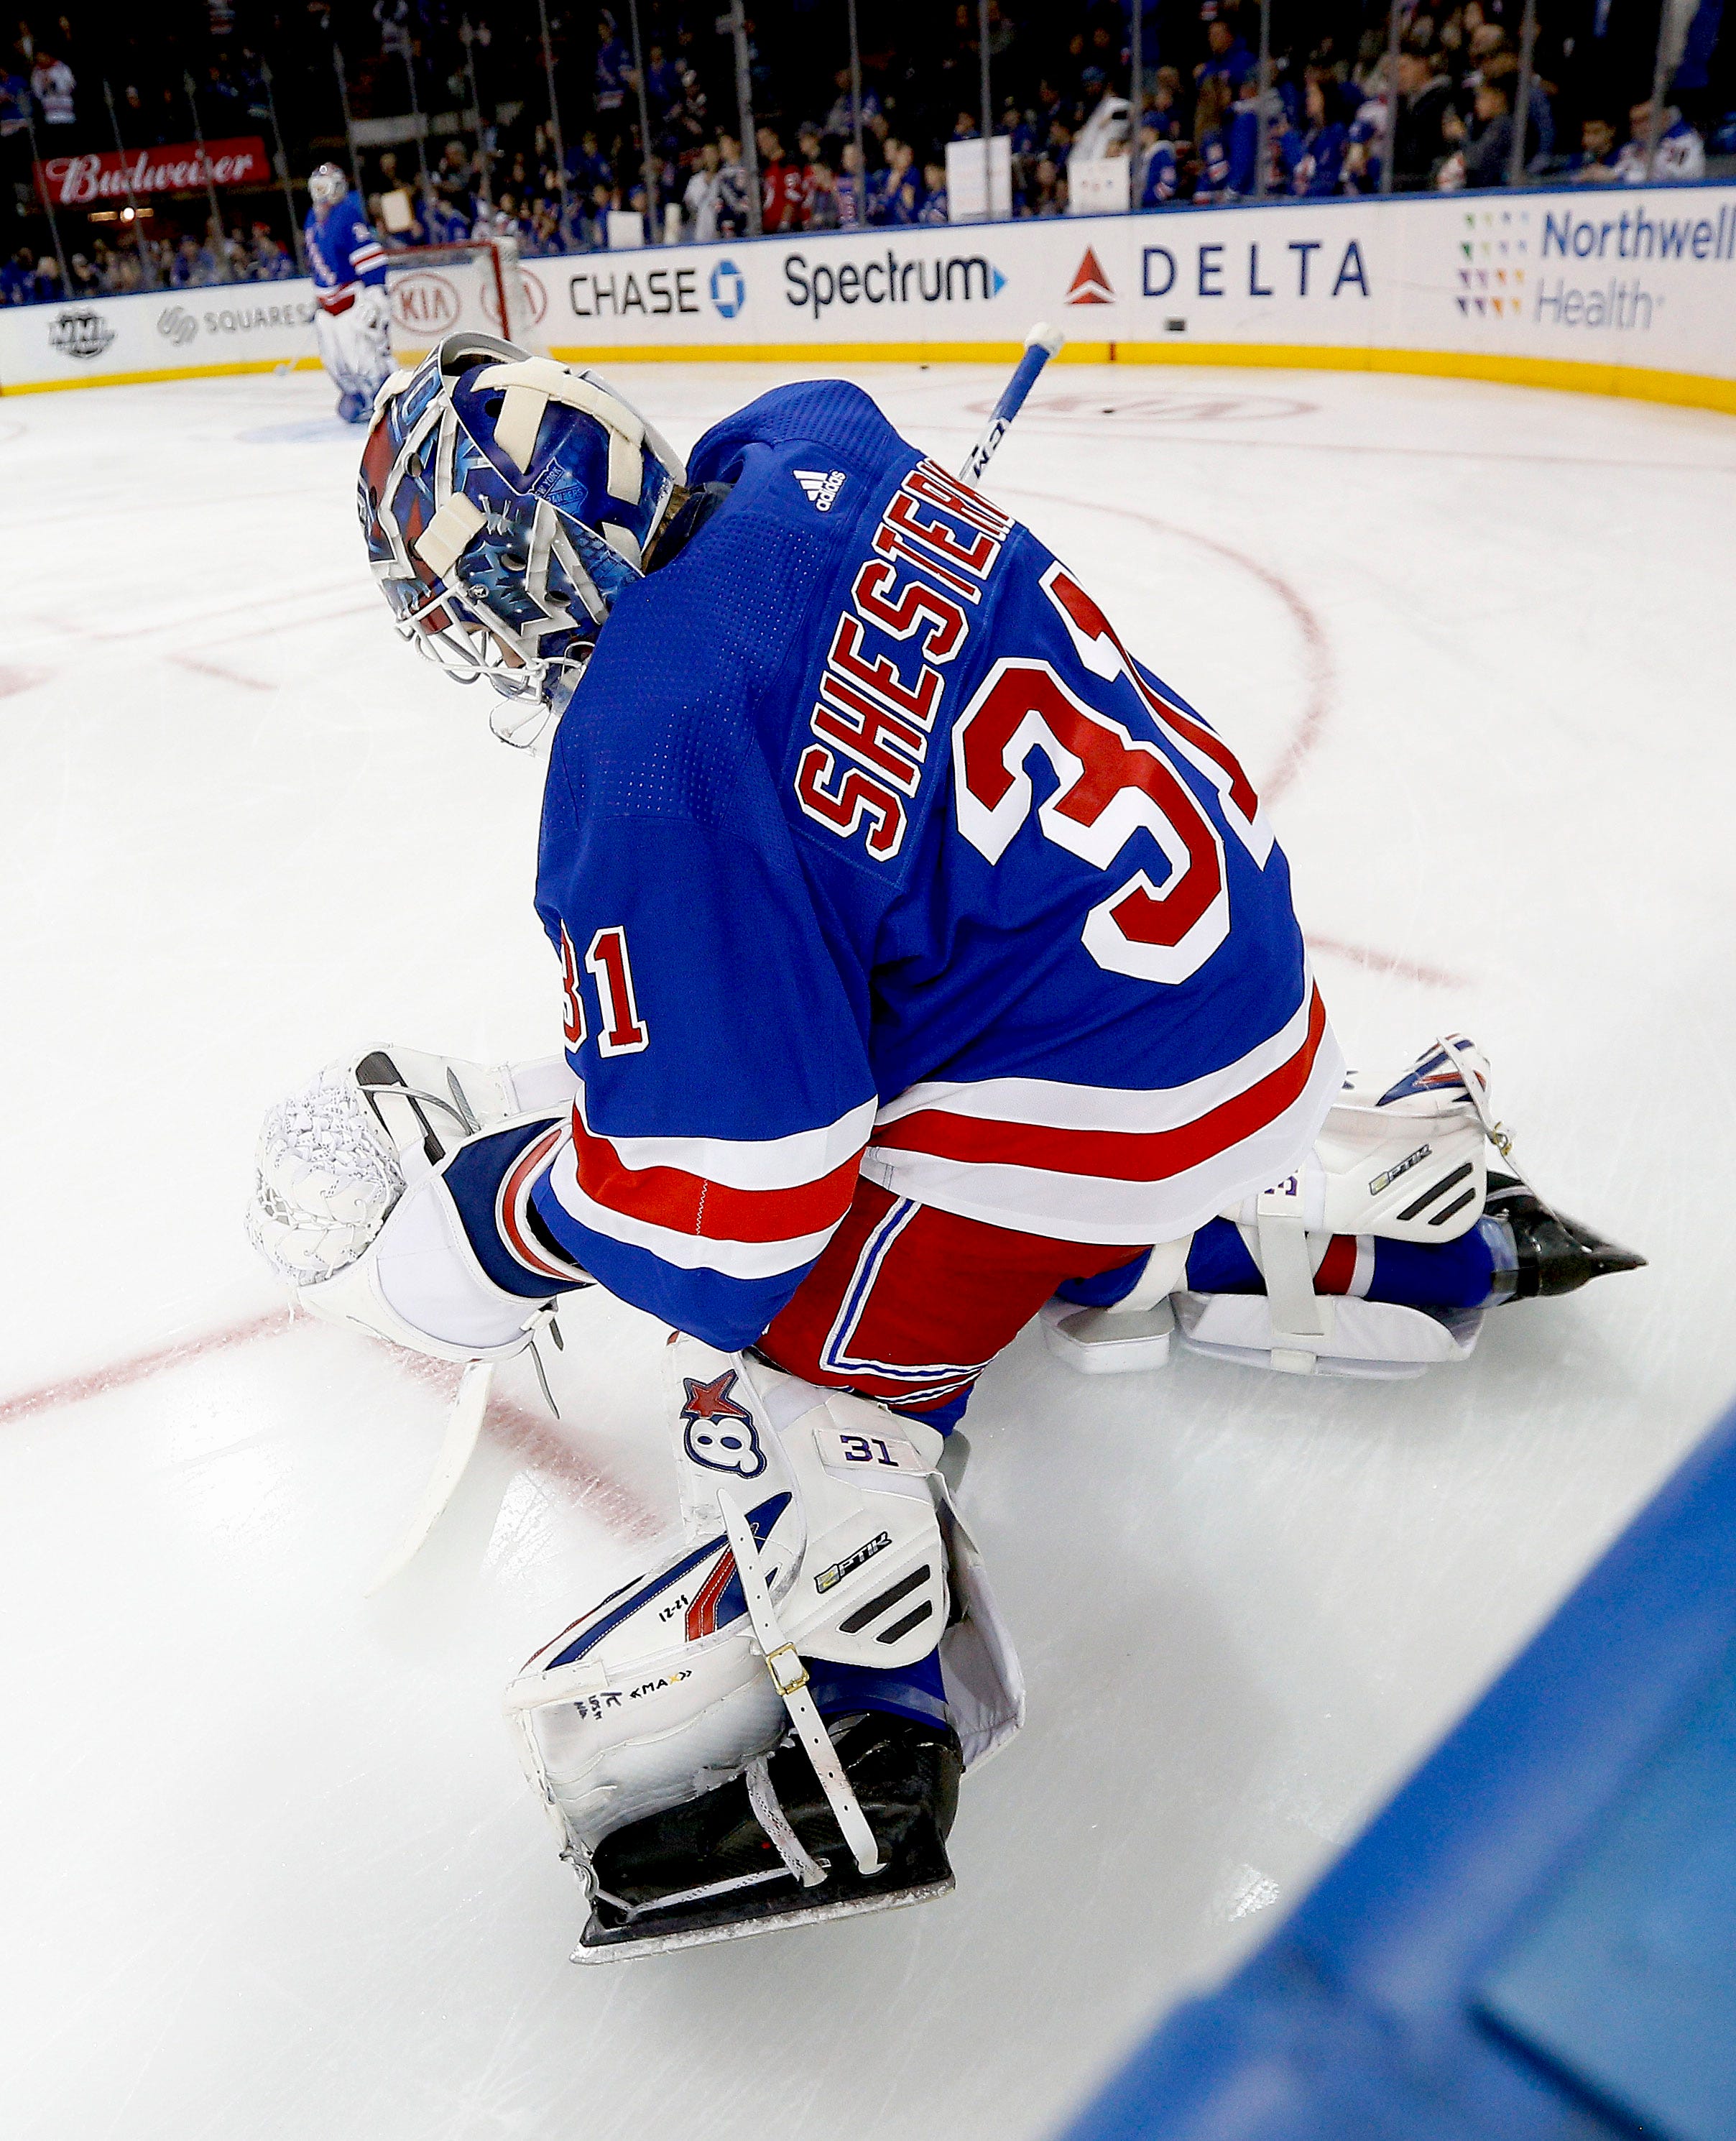 new jersey devils at new york rangers